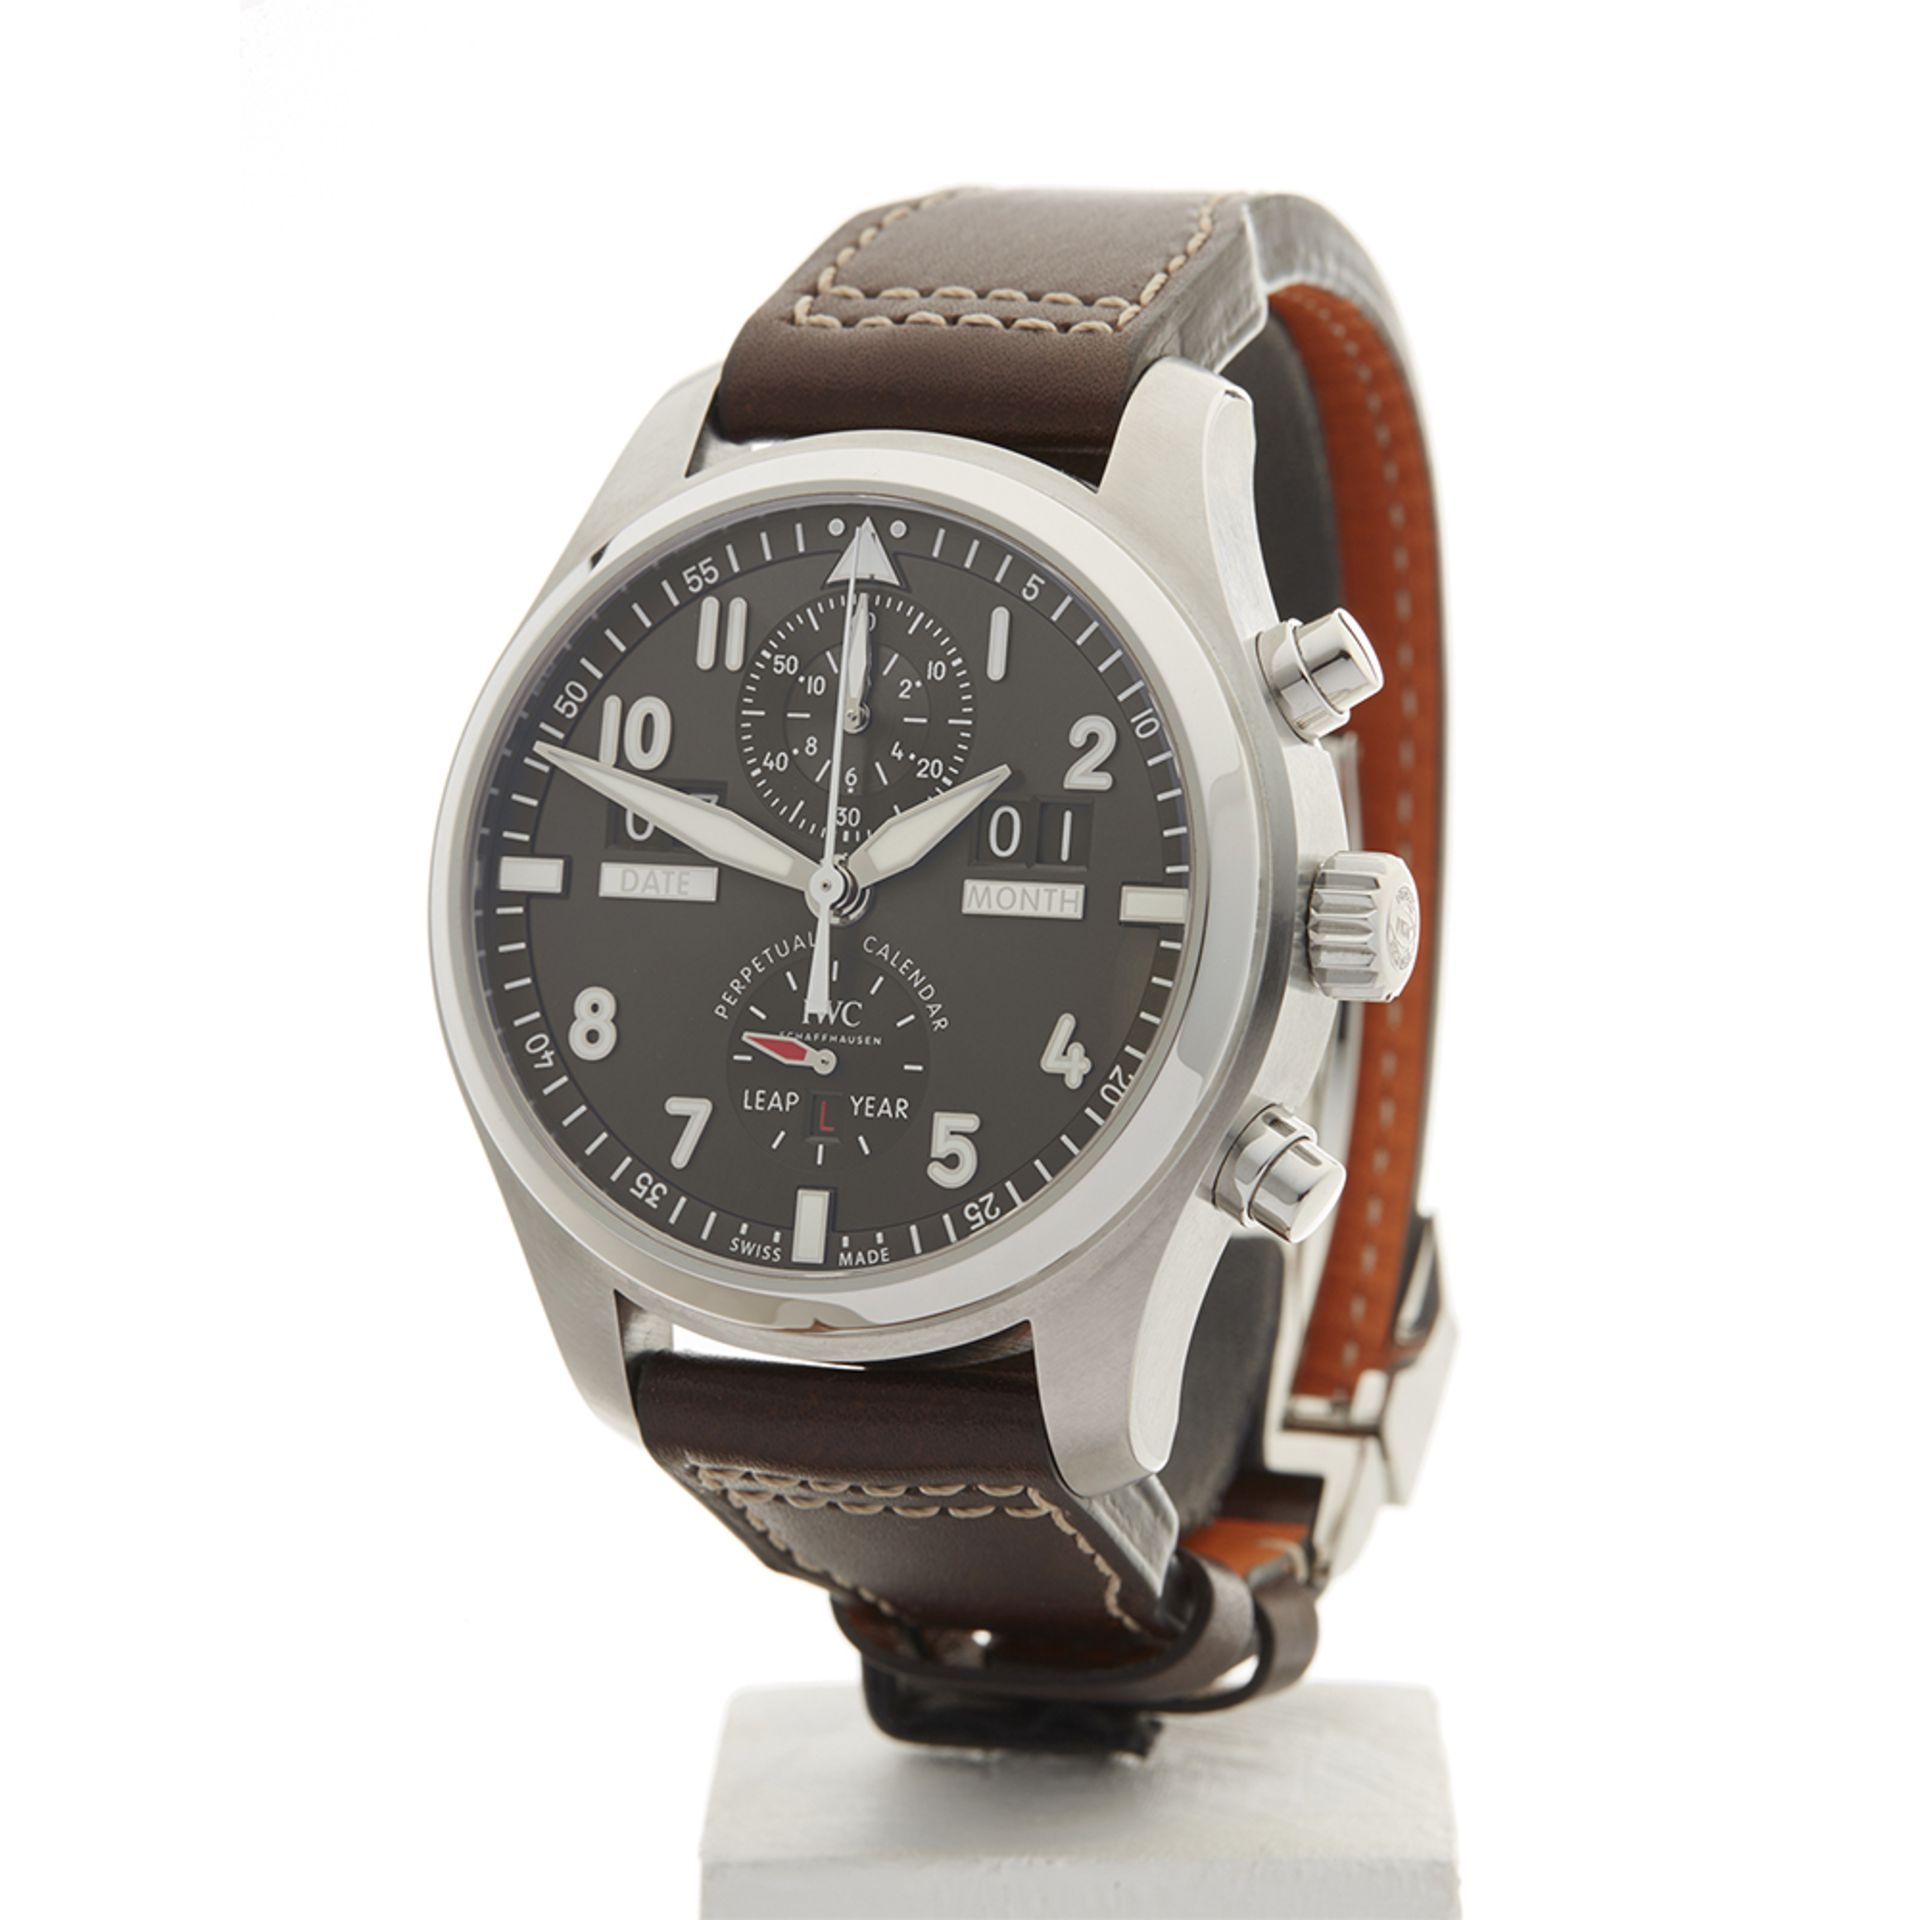 IWC Pilot's Perpetual Calendar 46mm Stainless Steel - IW379108 - Image 3 of 9